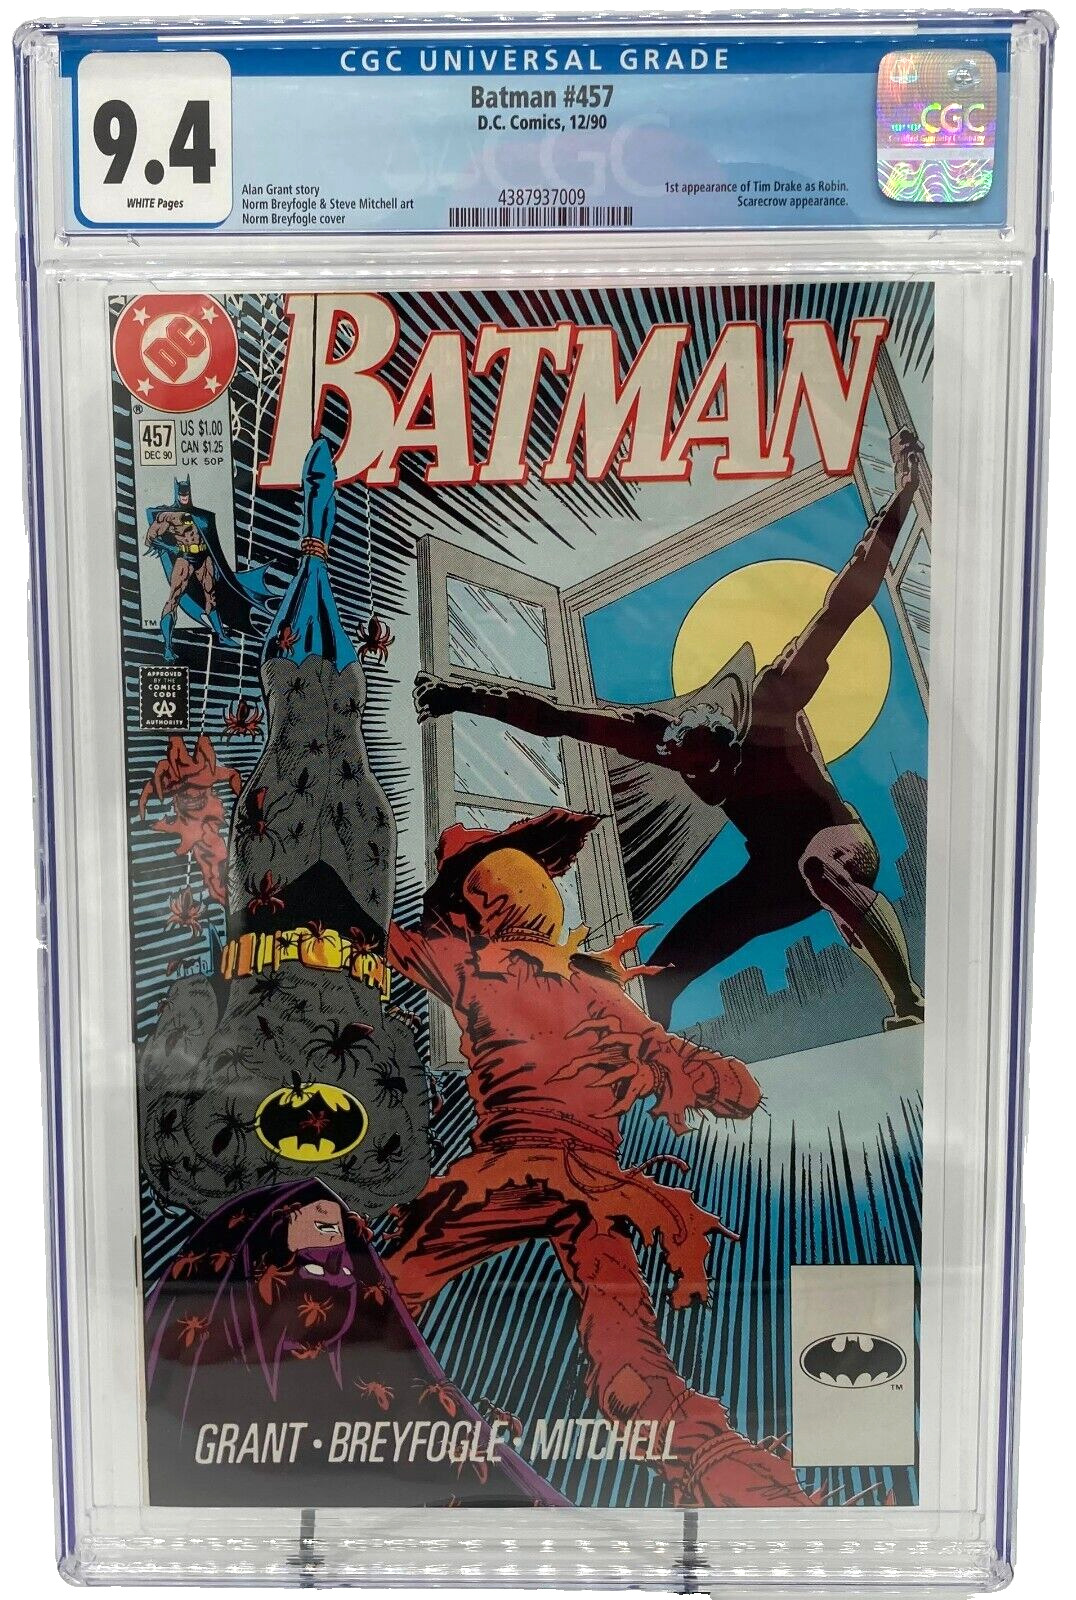 BATMAN #457 CGC Graded 9.4 White Pages 1st Appearance of Tim Drake as Robin DC